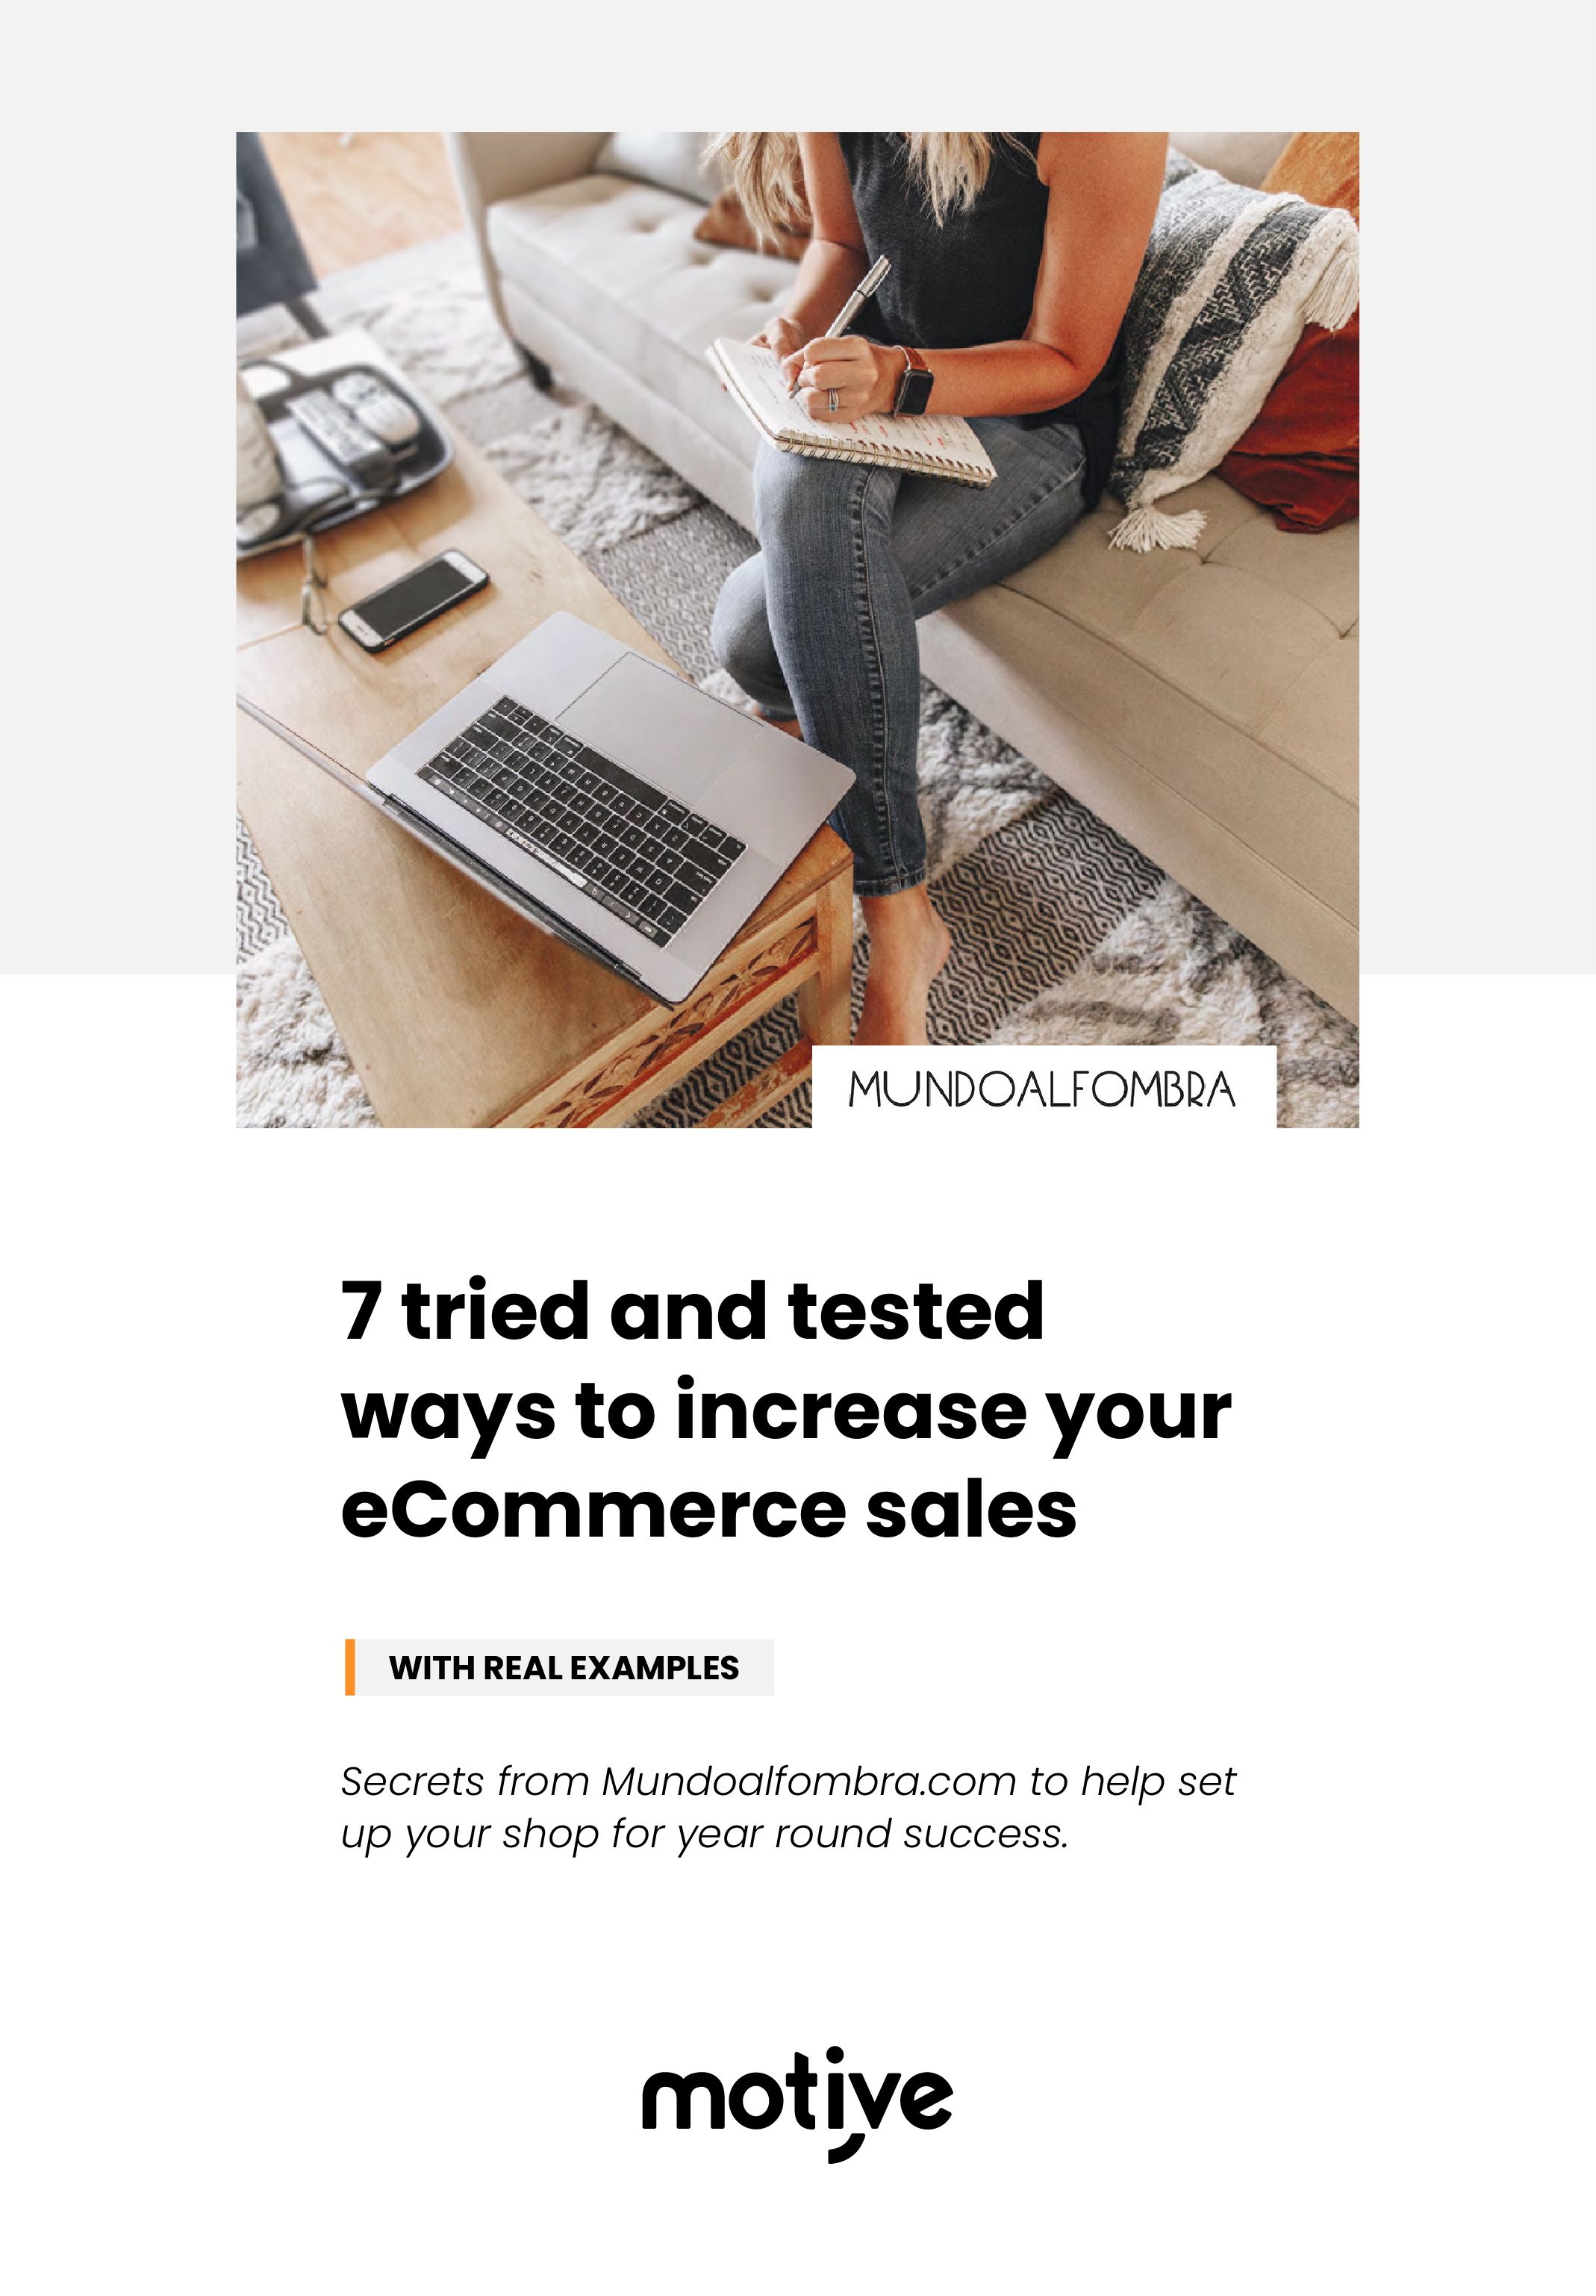 7 tried and tested ways to increase your eCommerce sales (with examples)